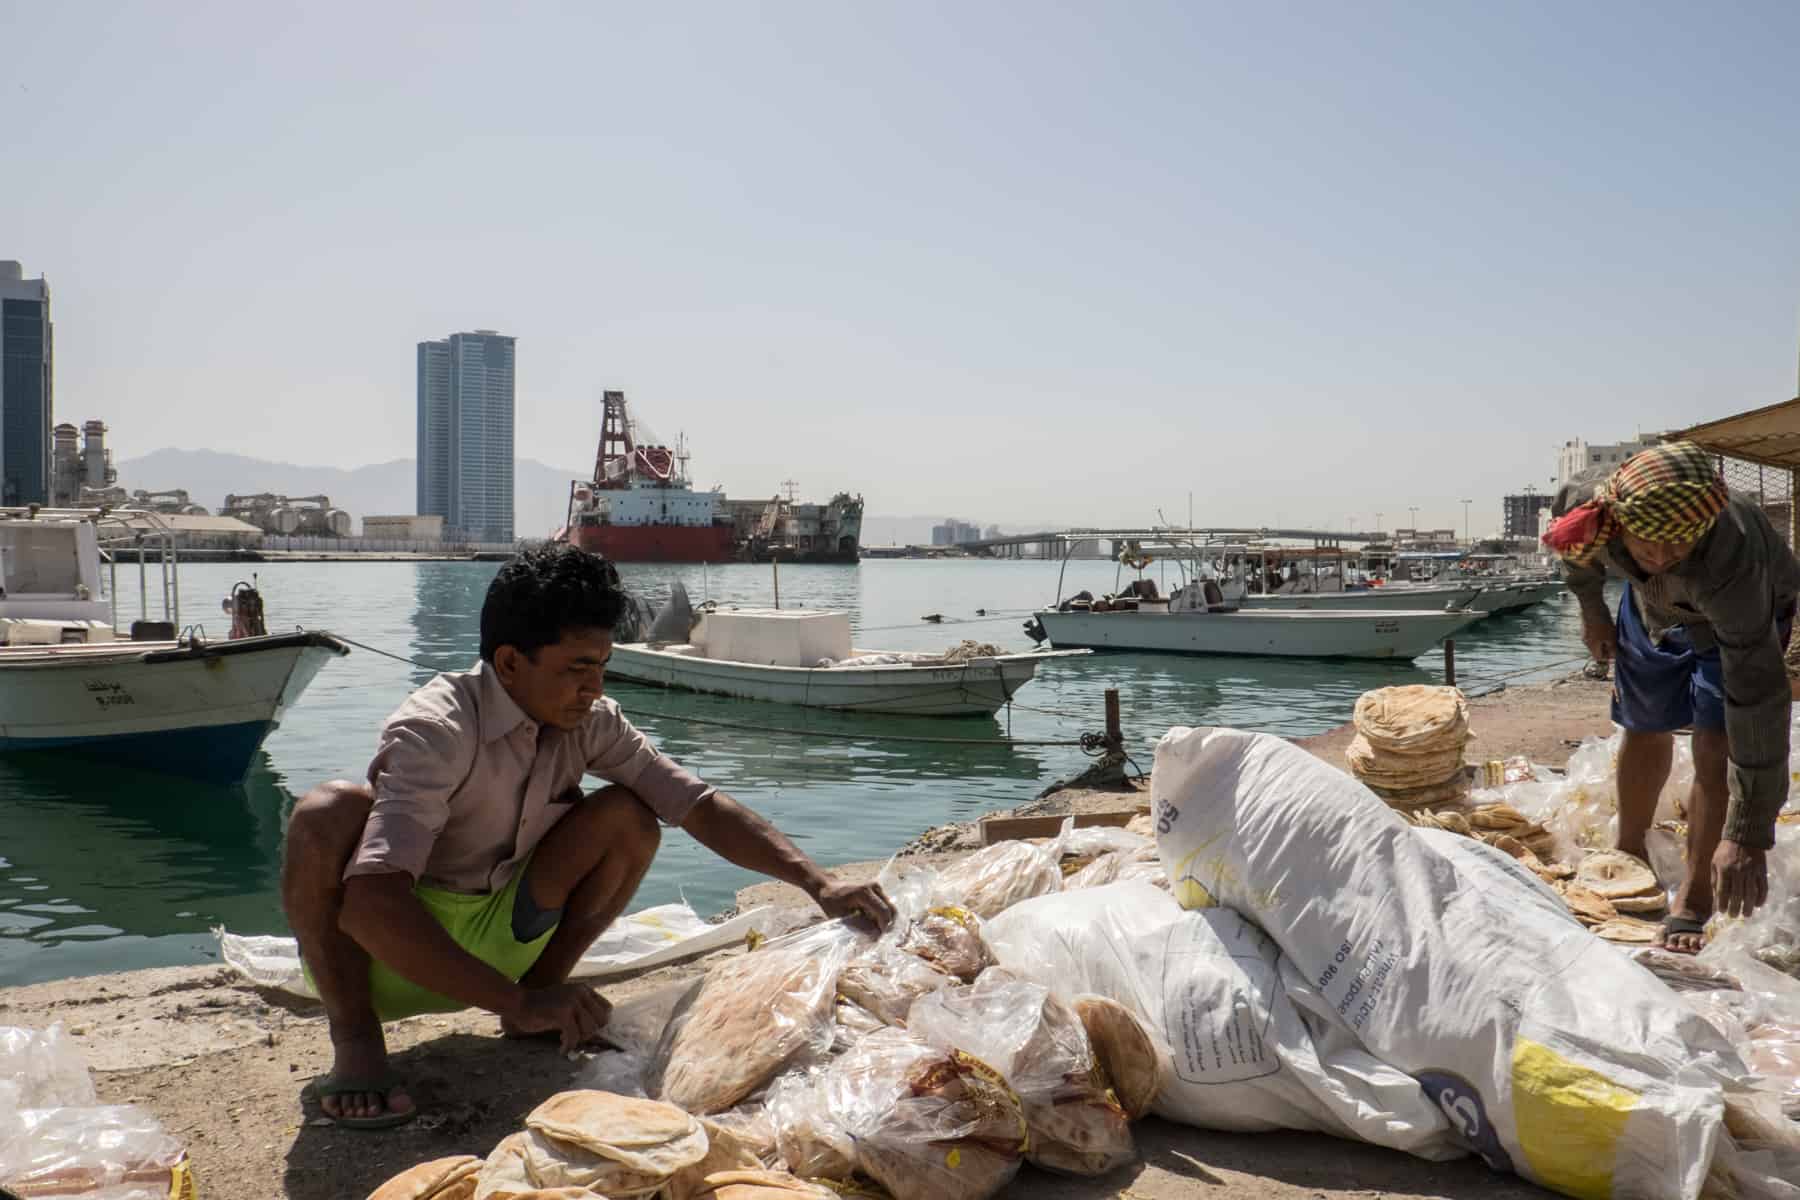 A man, squatting, sells flat bread from bags next to the waterfront and port area in Ras Al Khaimah, UAE